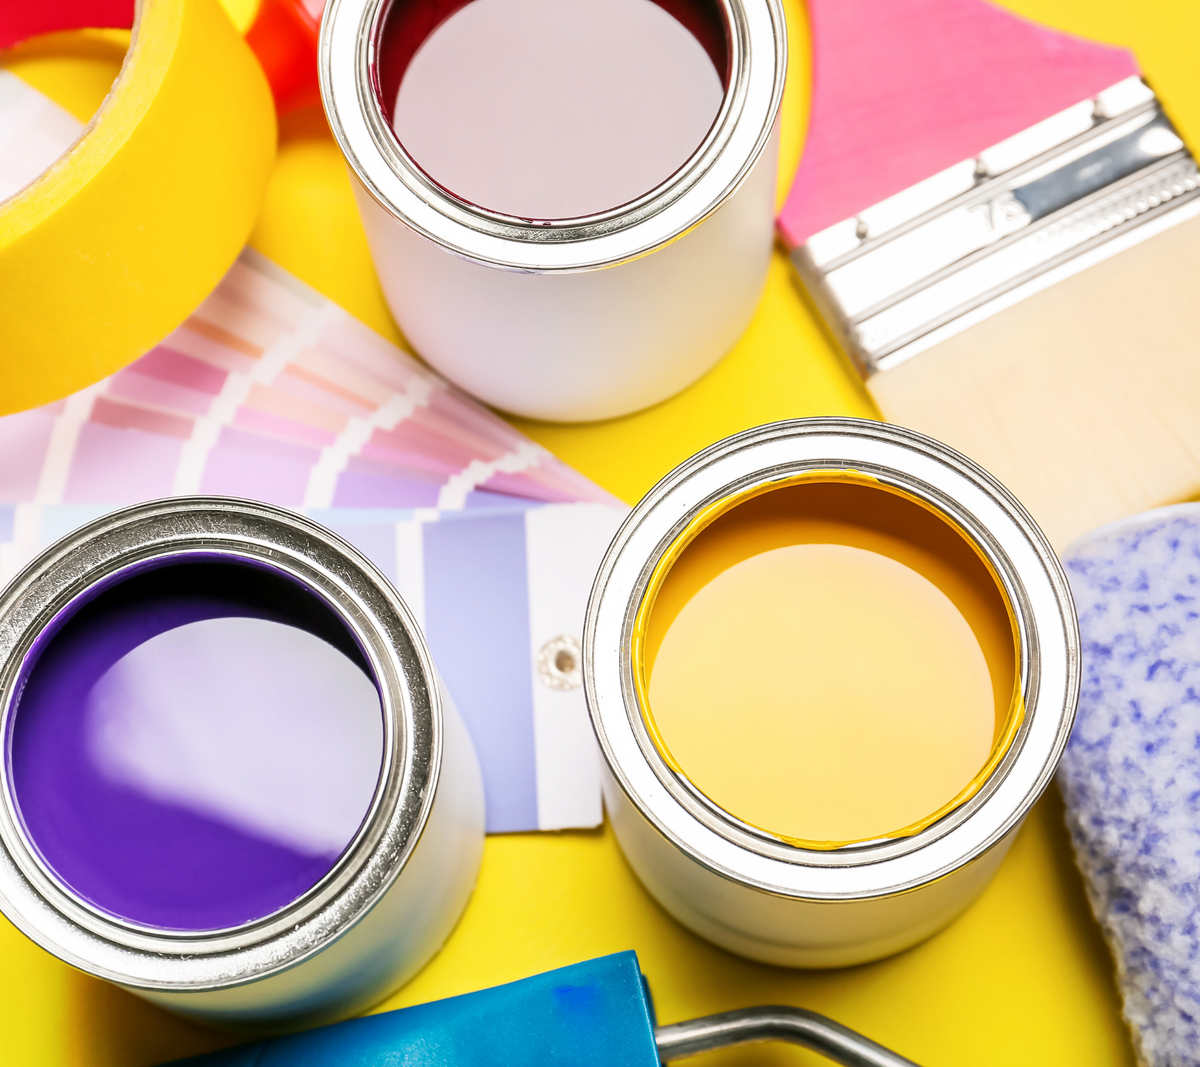 How To Choose An Interior Paint Colour That You'll Love For Years To Come